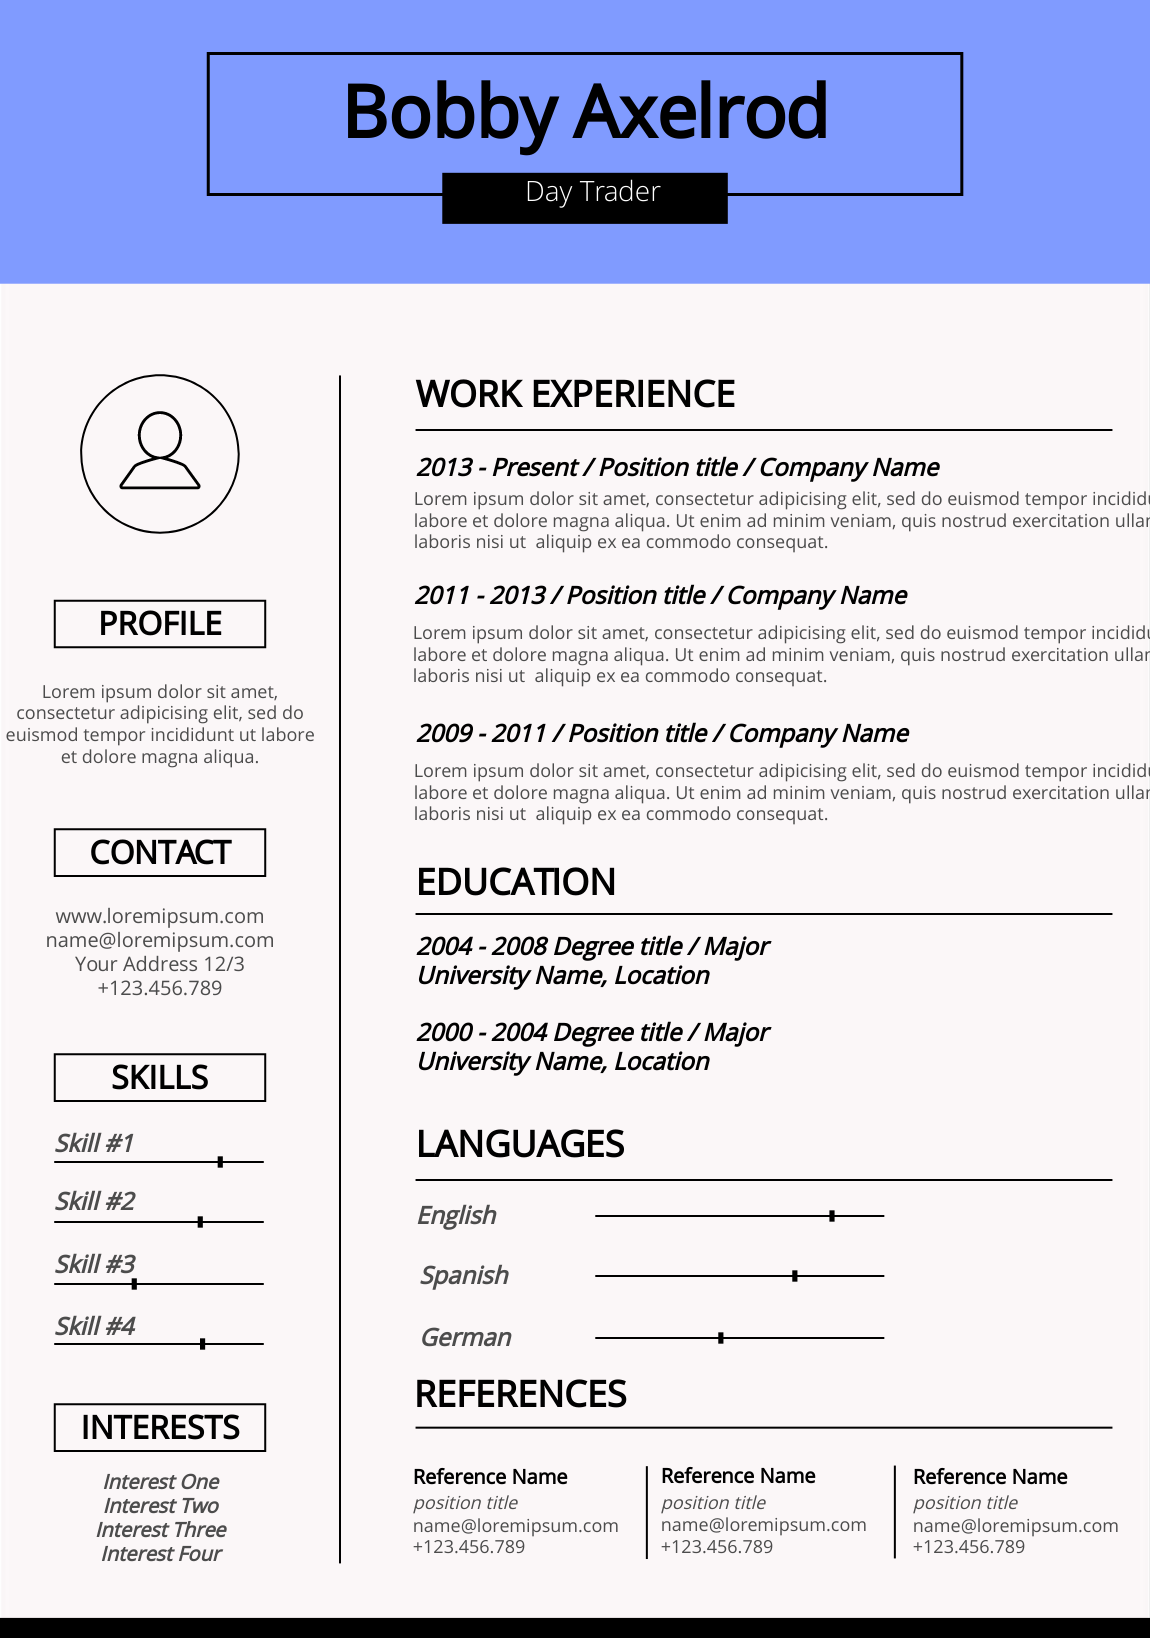 infographic-resume-template-ppt-free-depression-spr-che